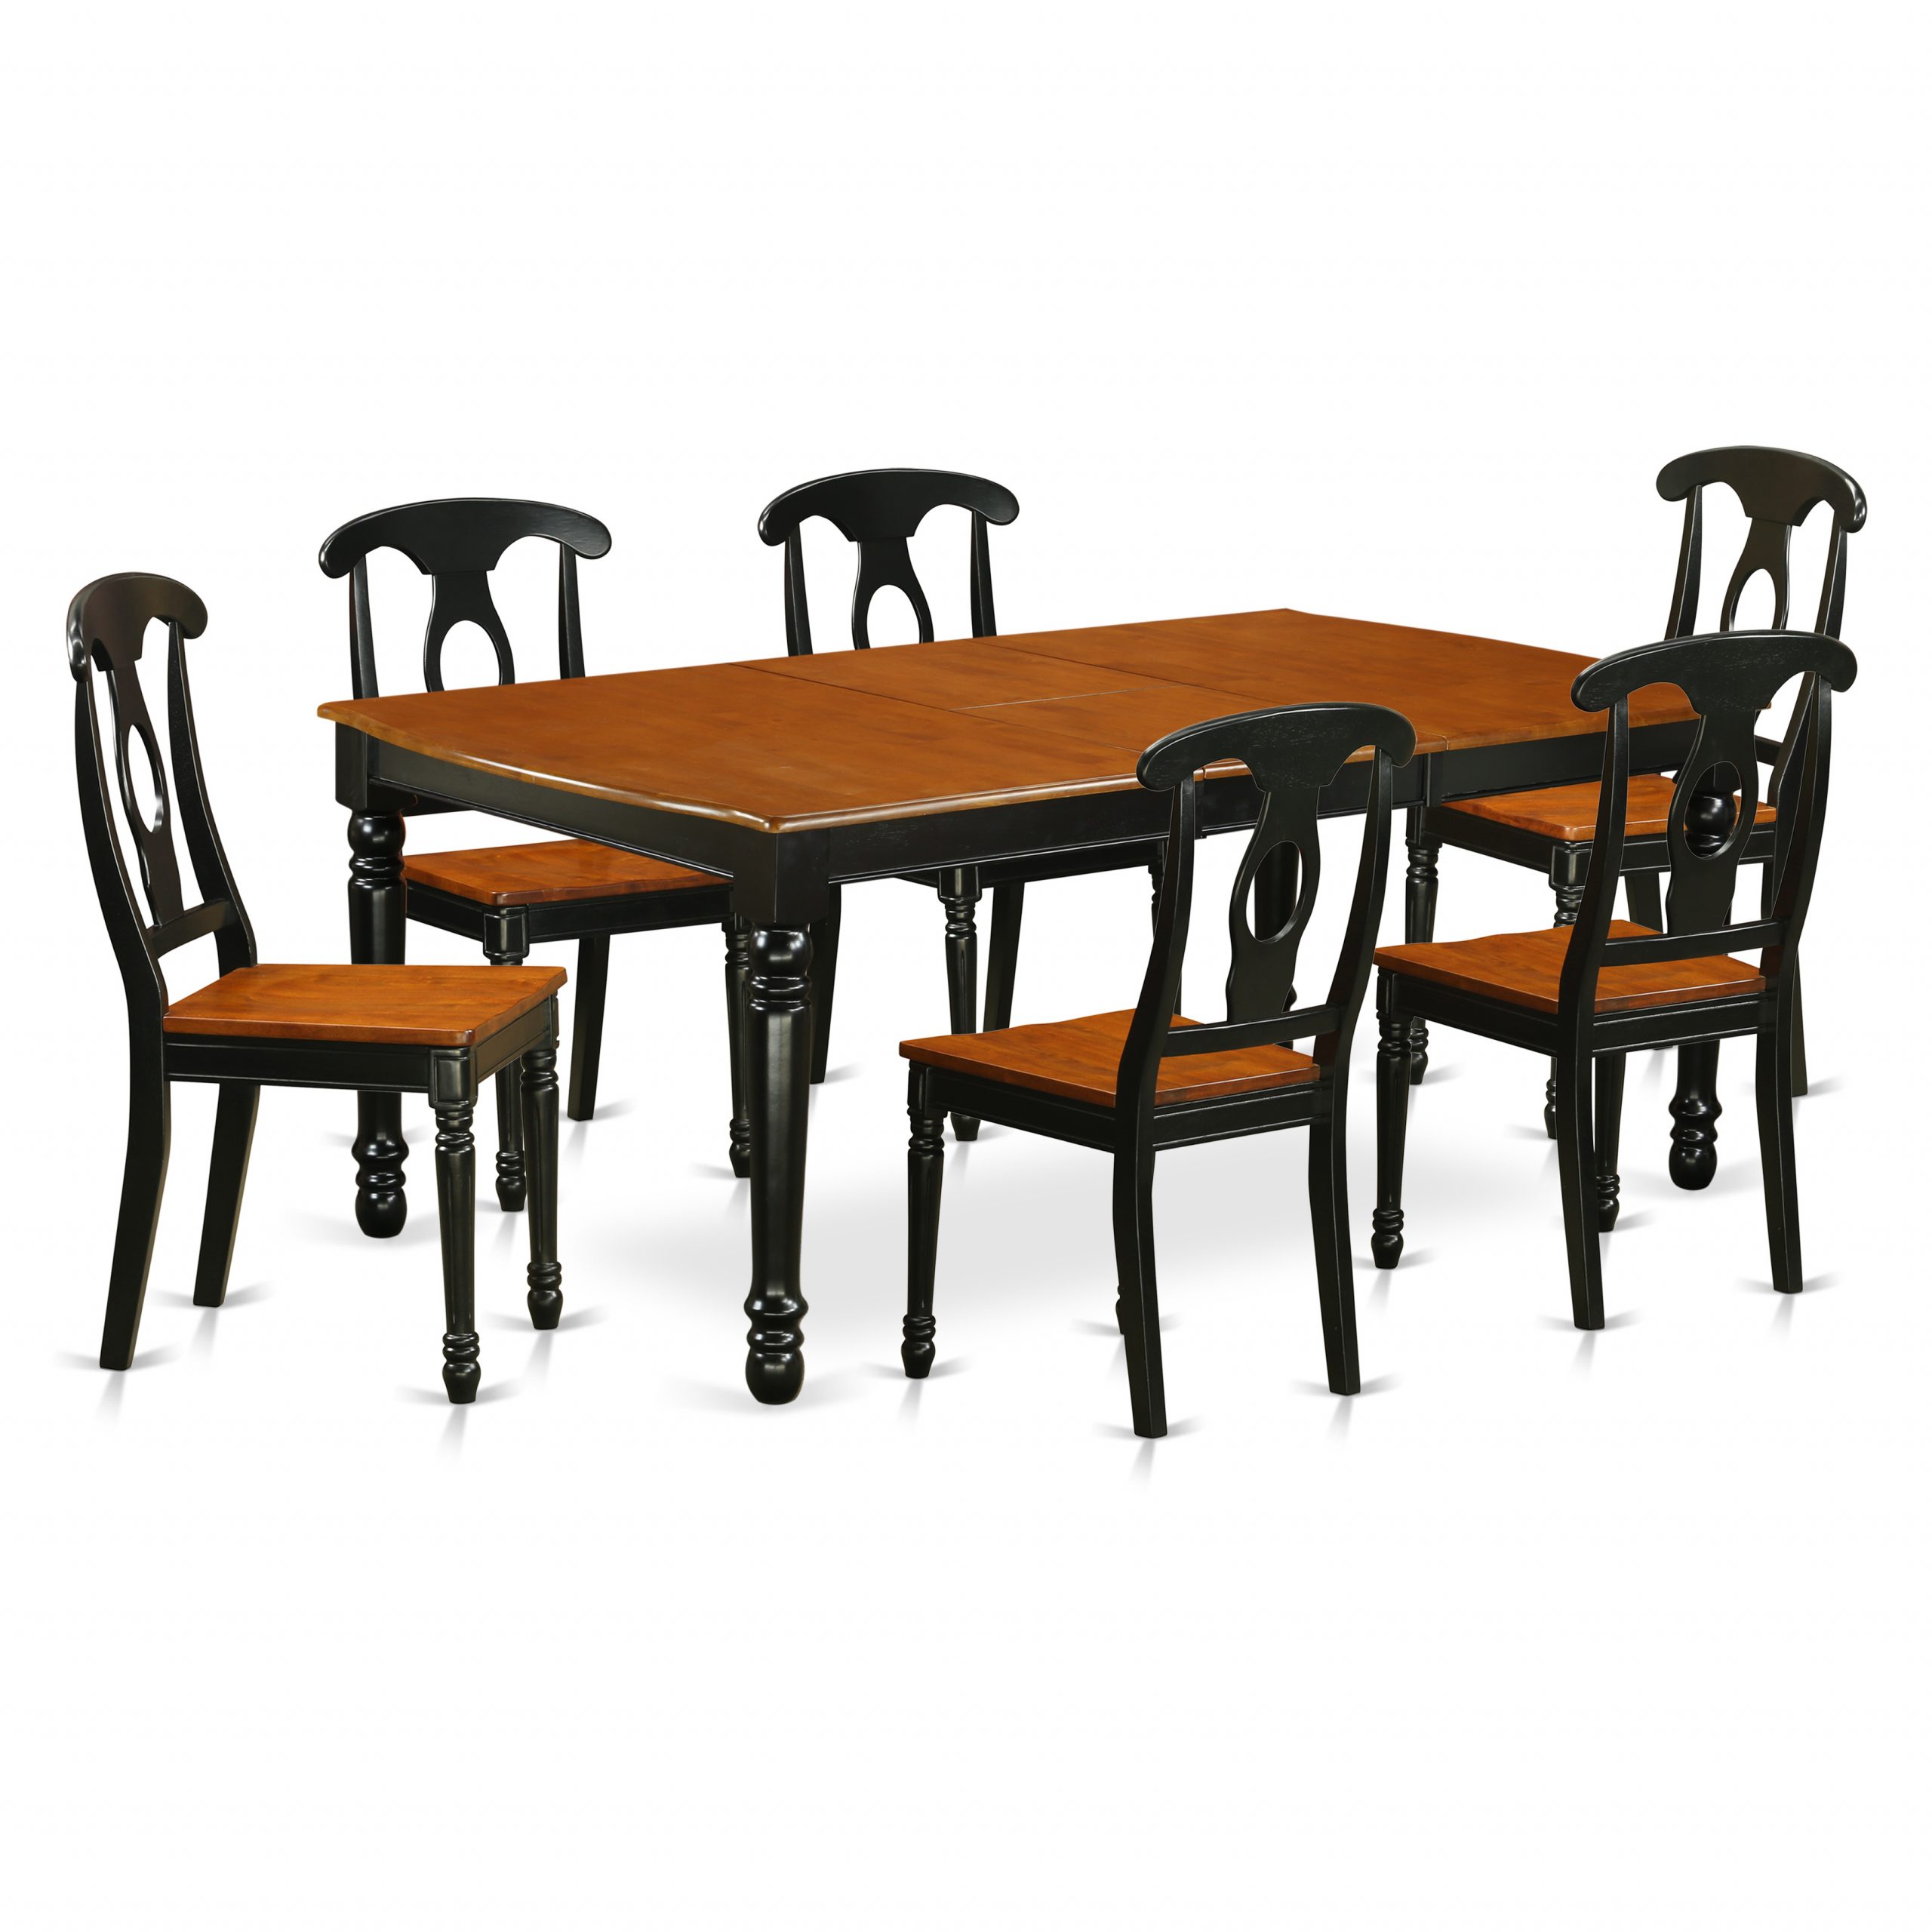 East West Furniture Doke7 Bch W 7 Piece Table And Chair Set With One Dover Dining Room Table And 6 Dining Room Chairs In A Black And Cherry Finish throughout proportions 3500 X 3500